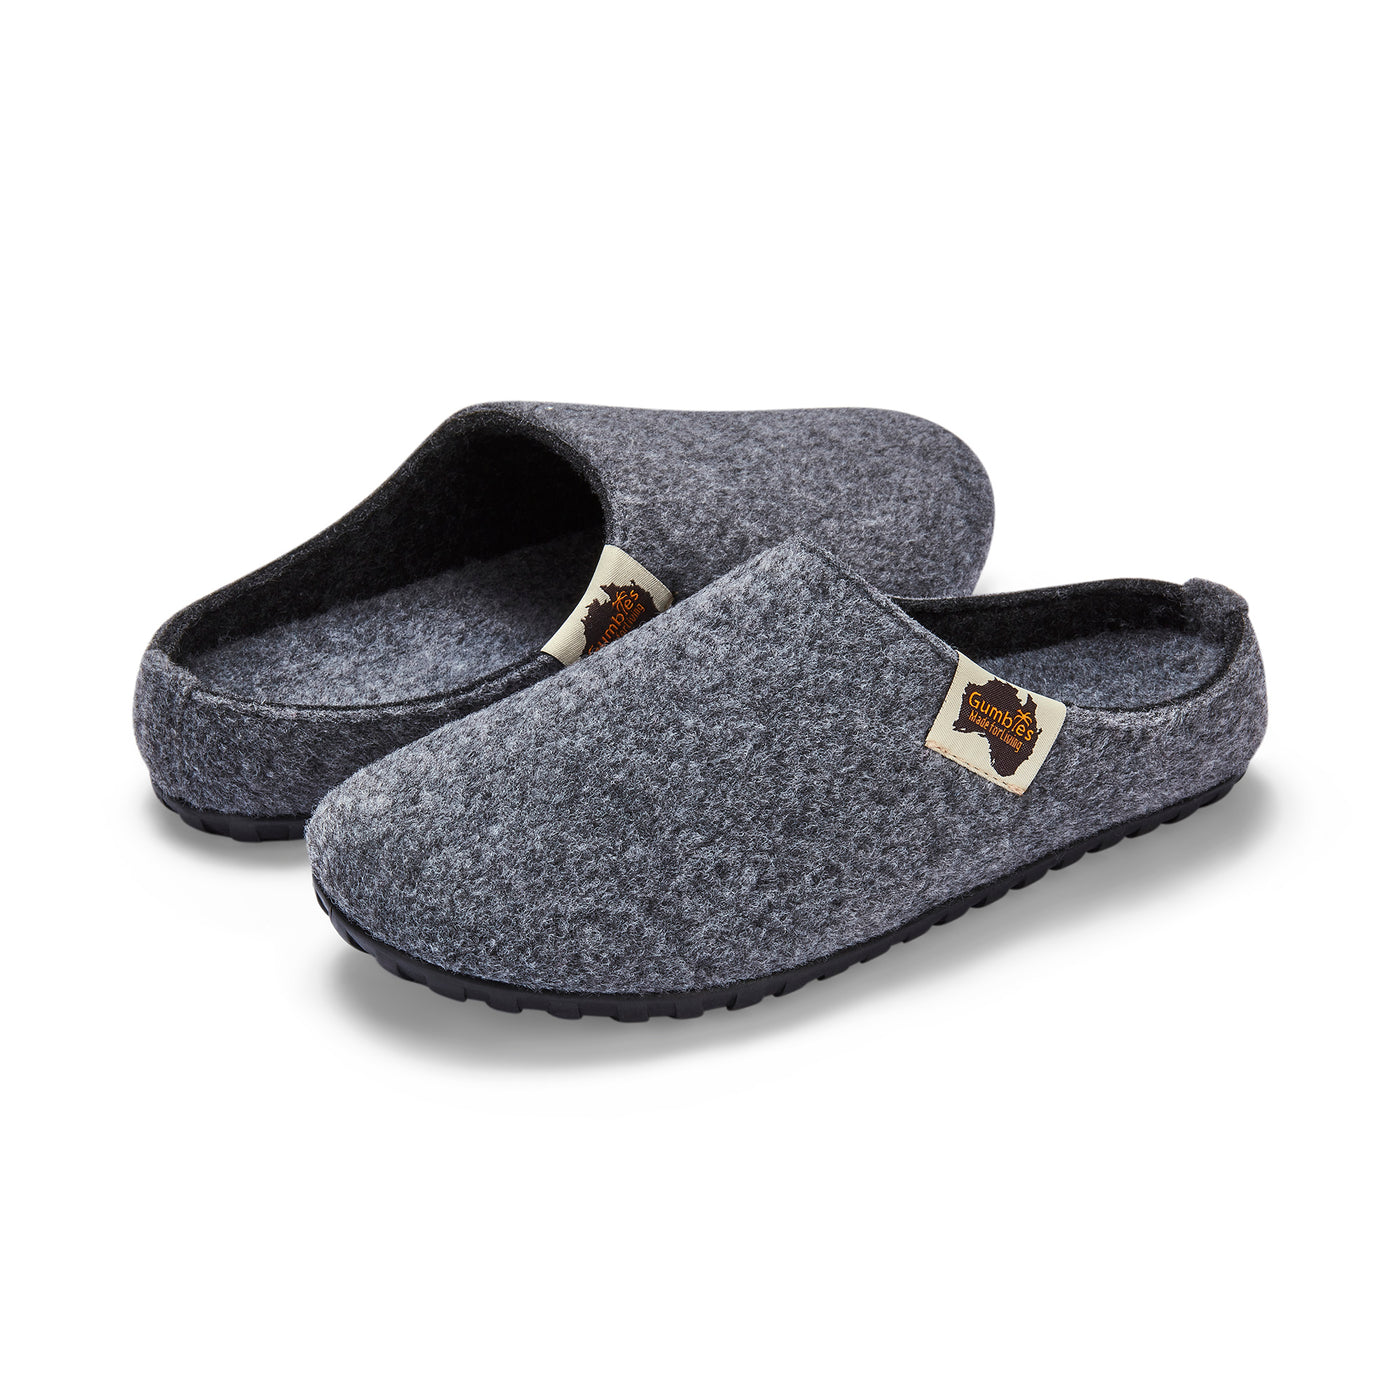 Pantuflas Outback Slippers Grey & Charcoal